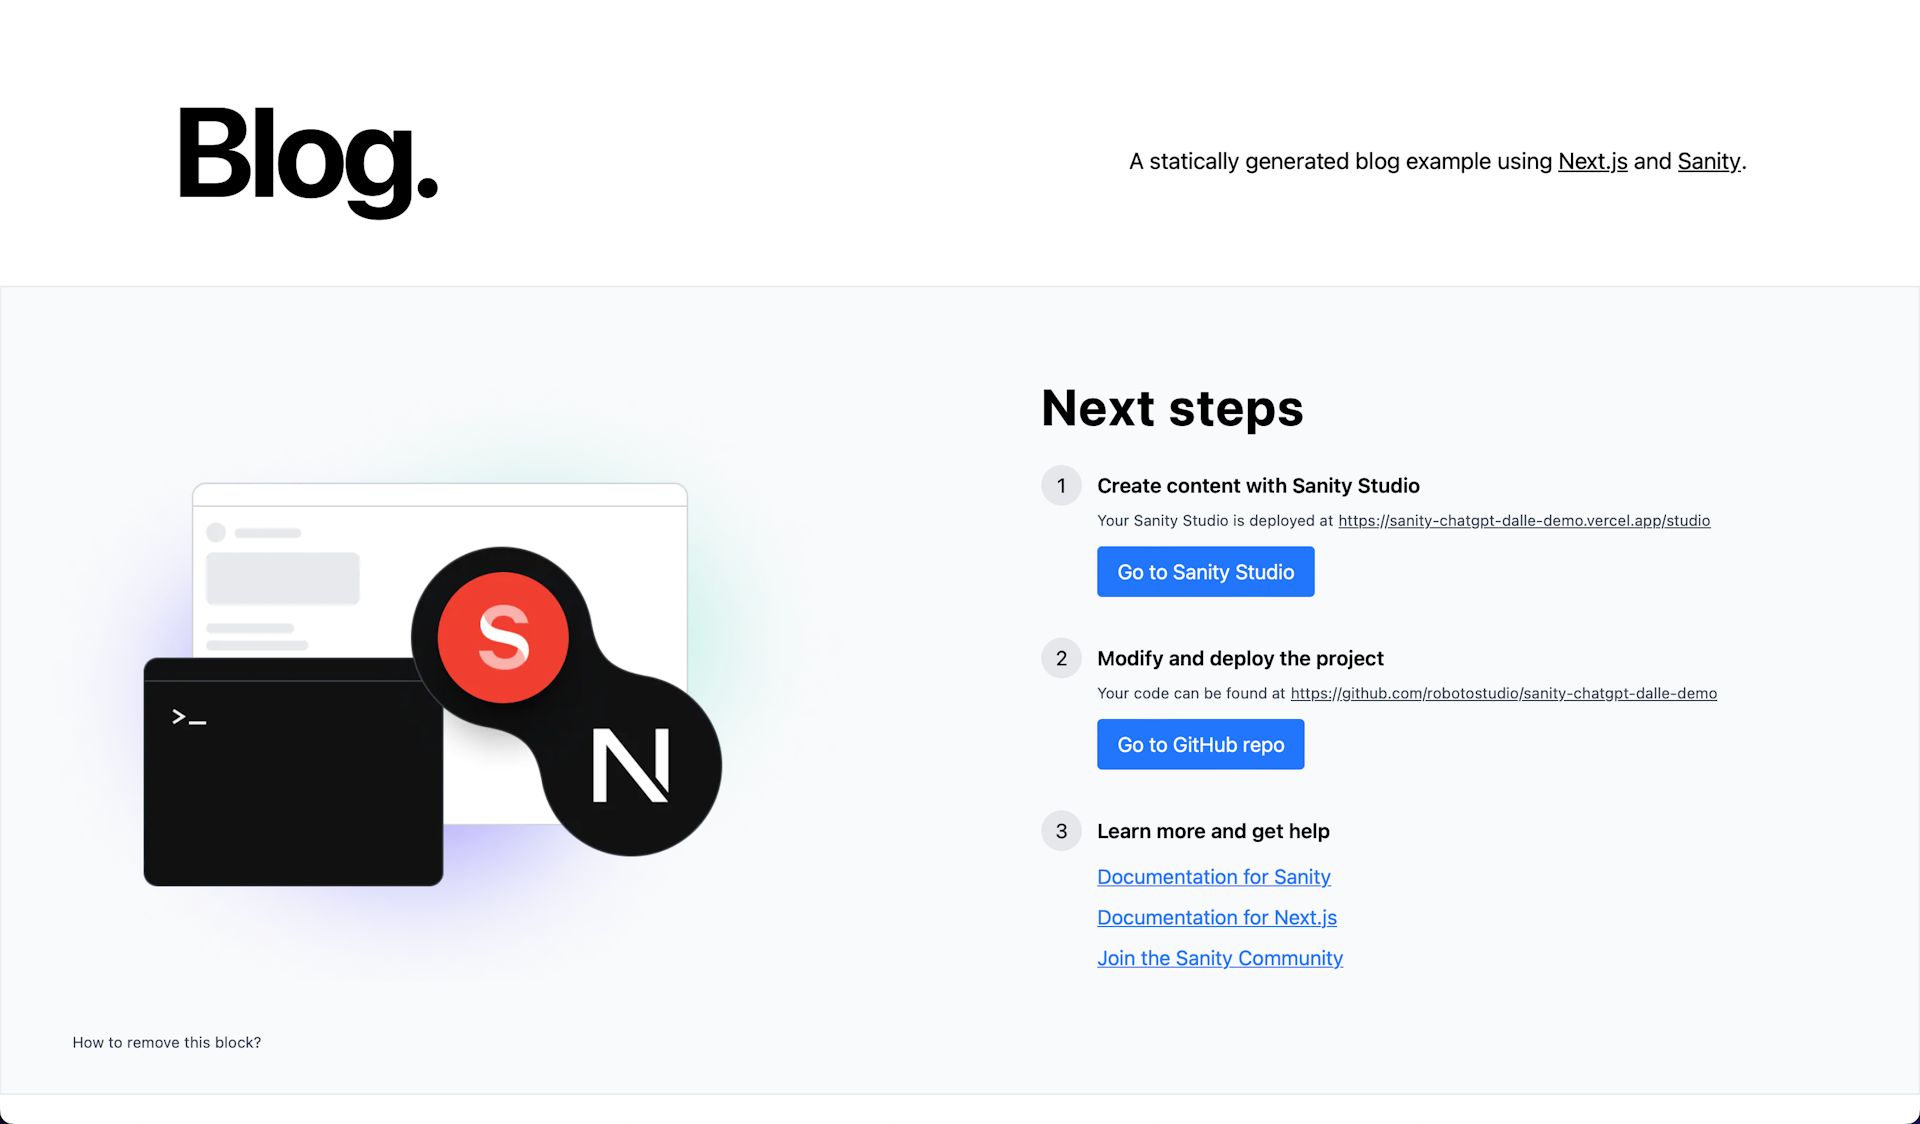 Next.js website with Sanity studio domain visible and deployment details